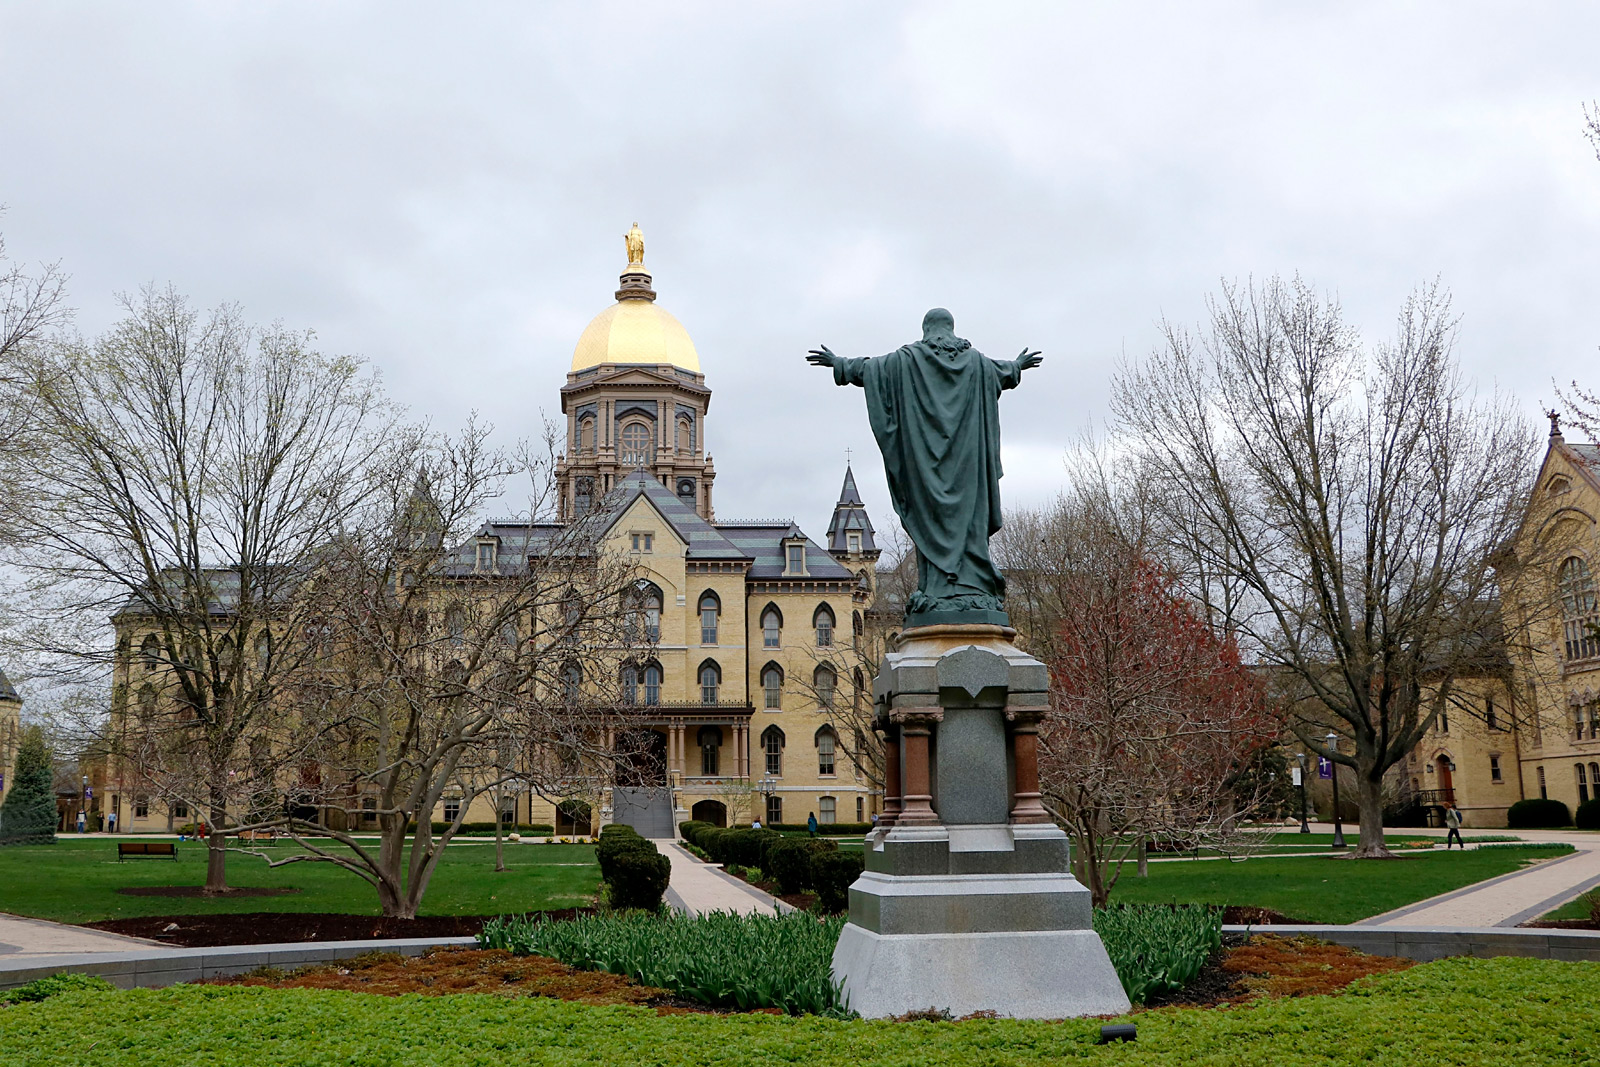 A portion of the University of Notre Dame campus is seen in South Bend, Indiana, on April 19, 2019.